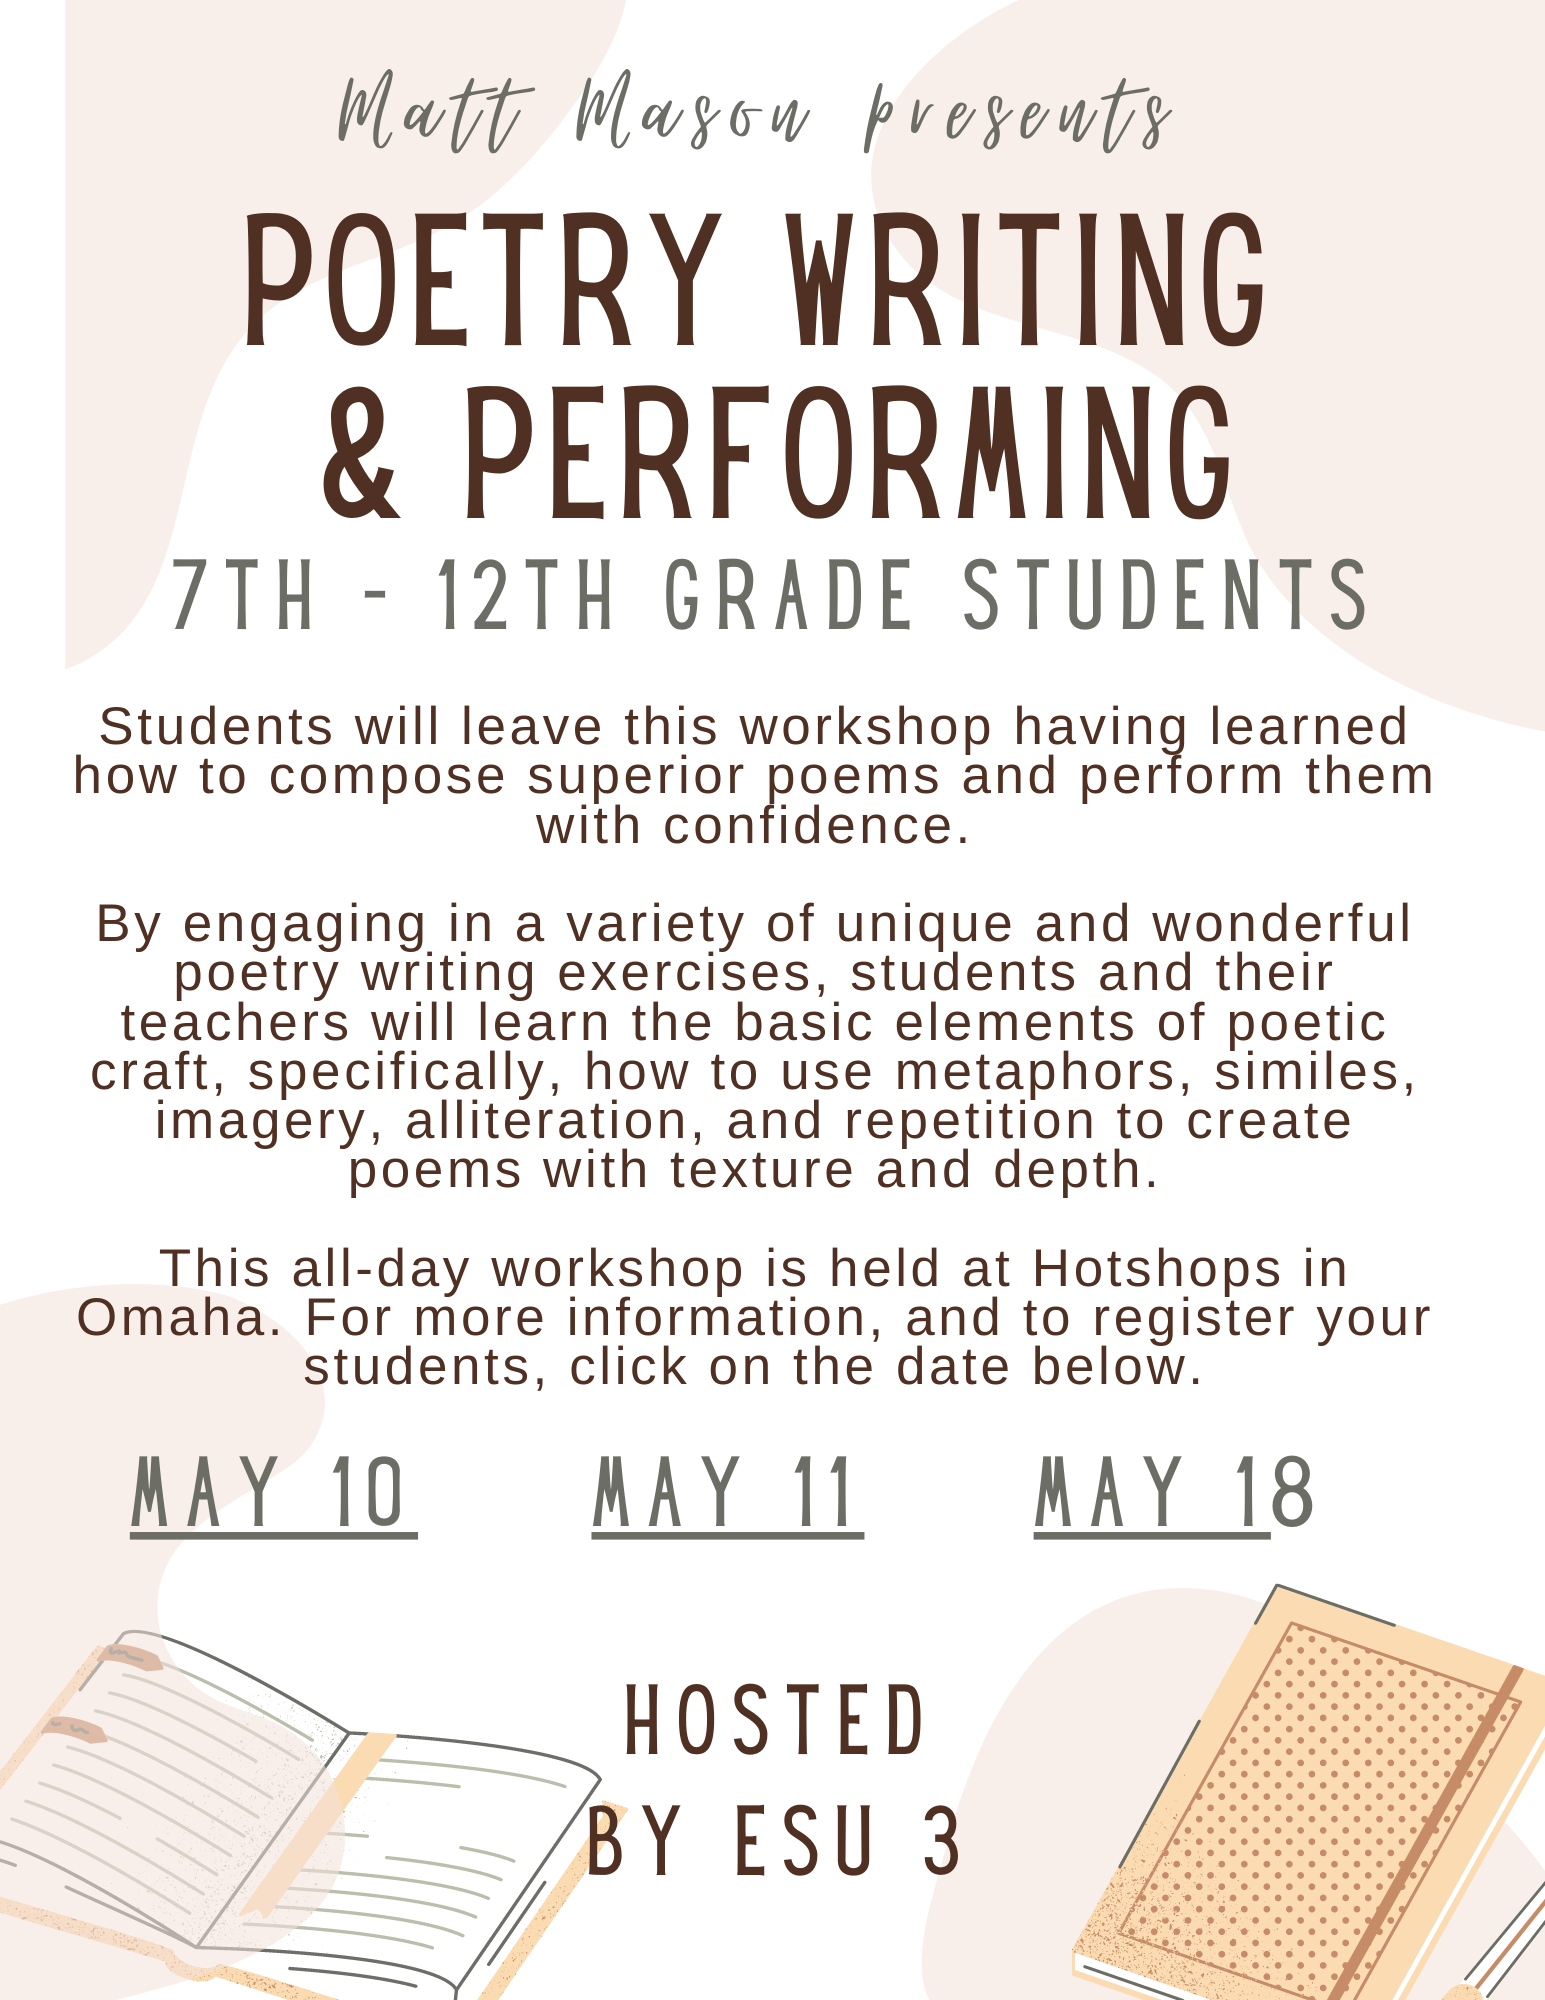 Click here to register for Poetry Writing and Performing.